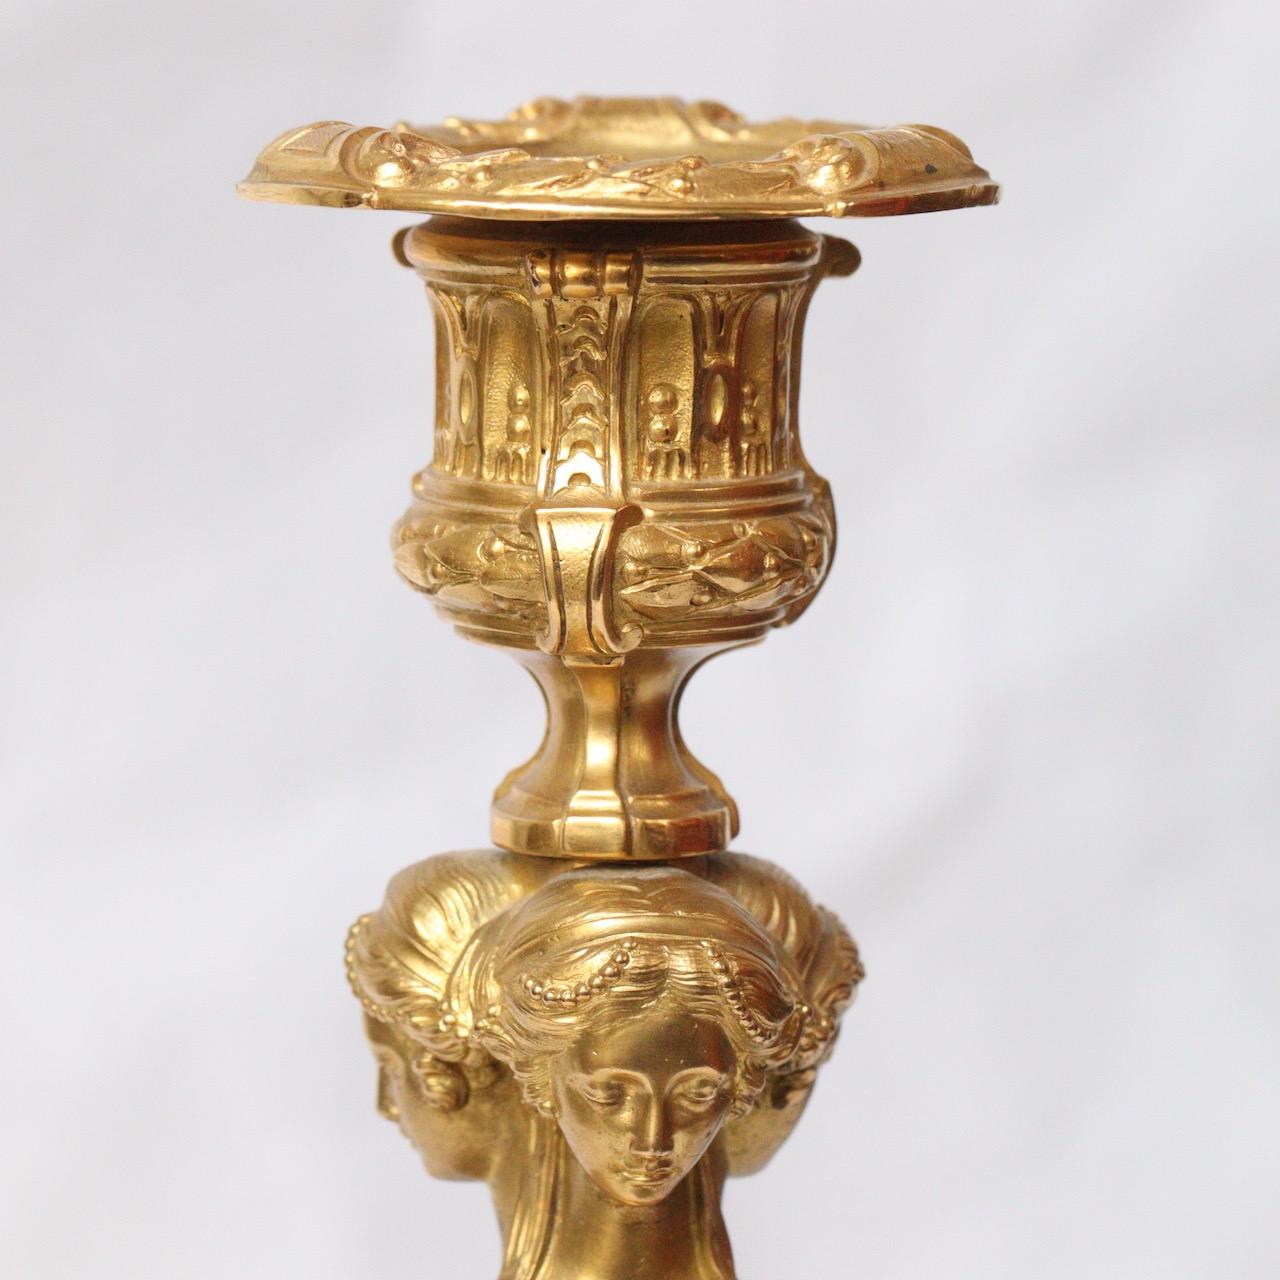 A Pair of Second Half 19th Century French Ormolu Louis XVI Style Candlesticks  4